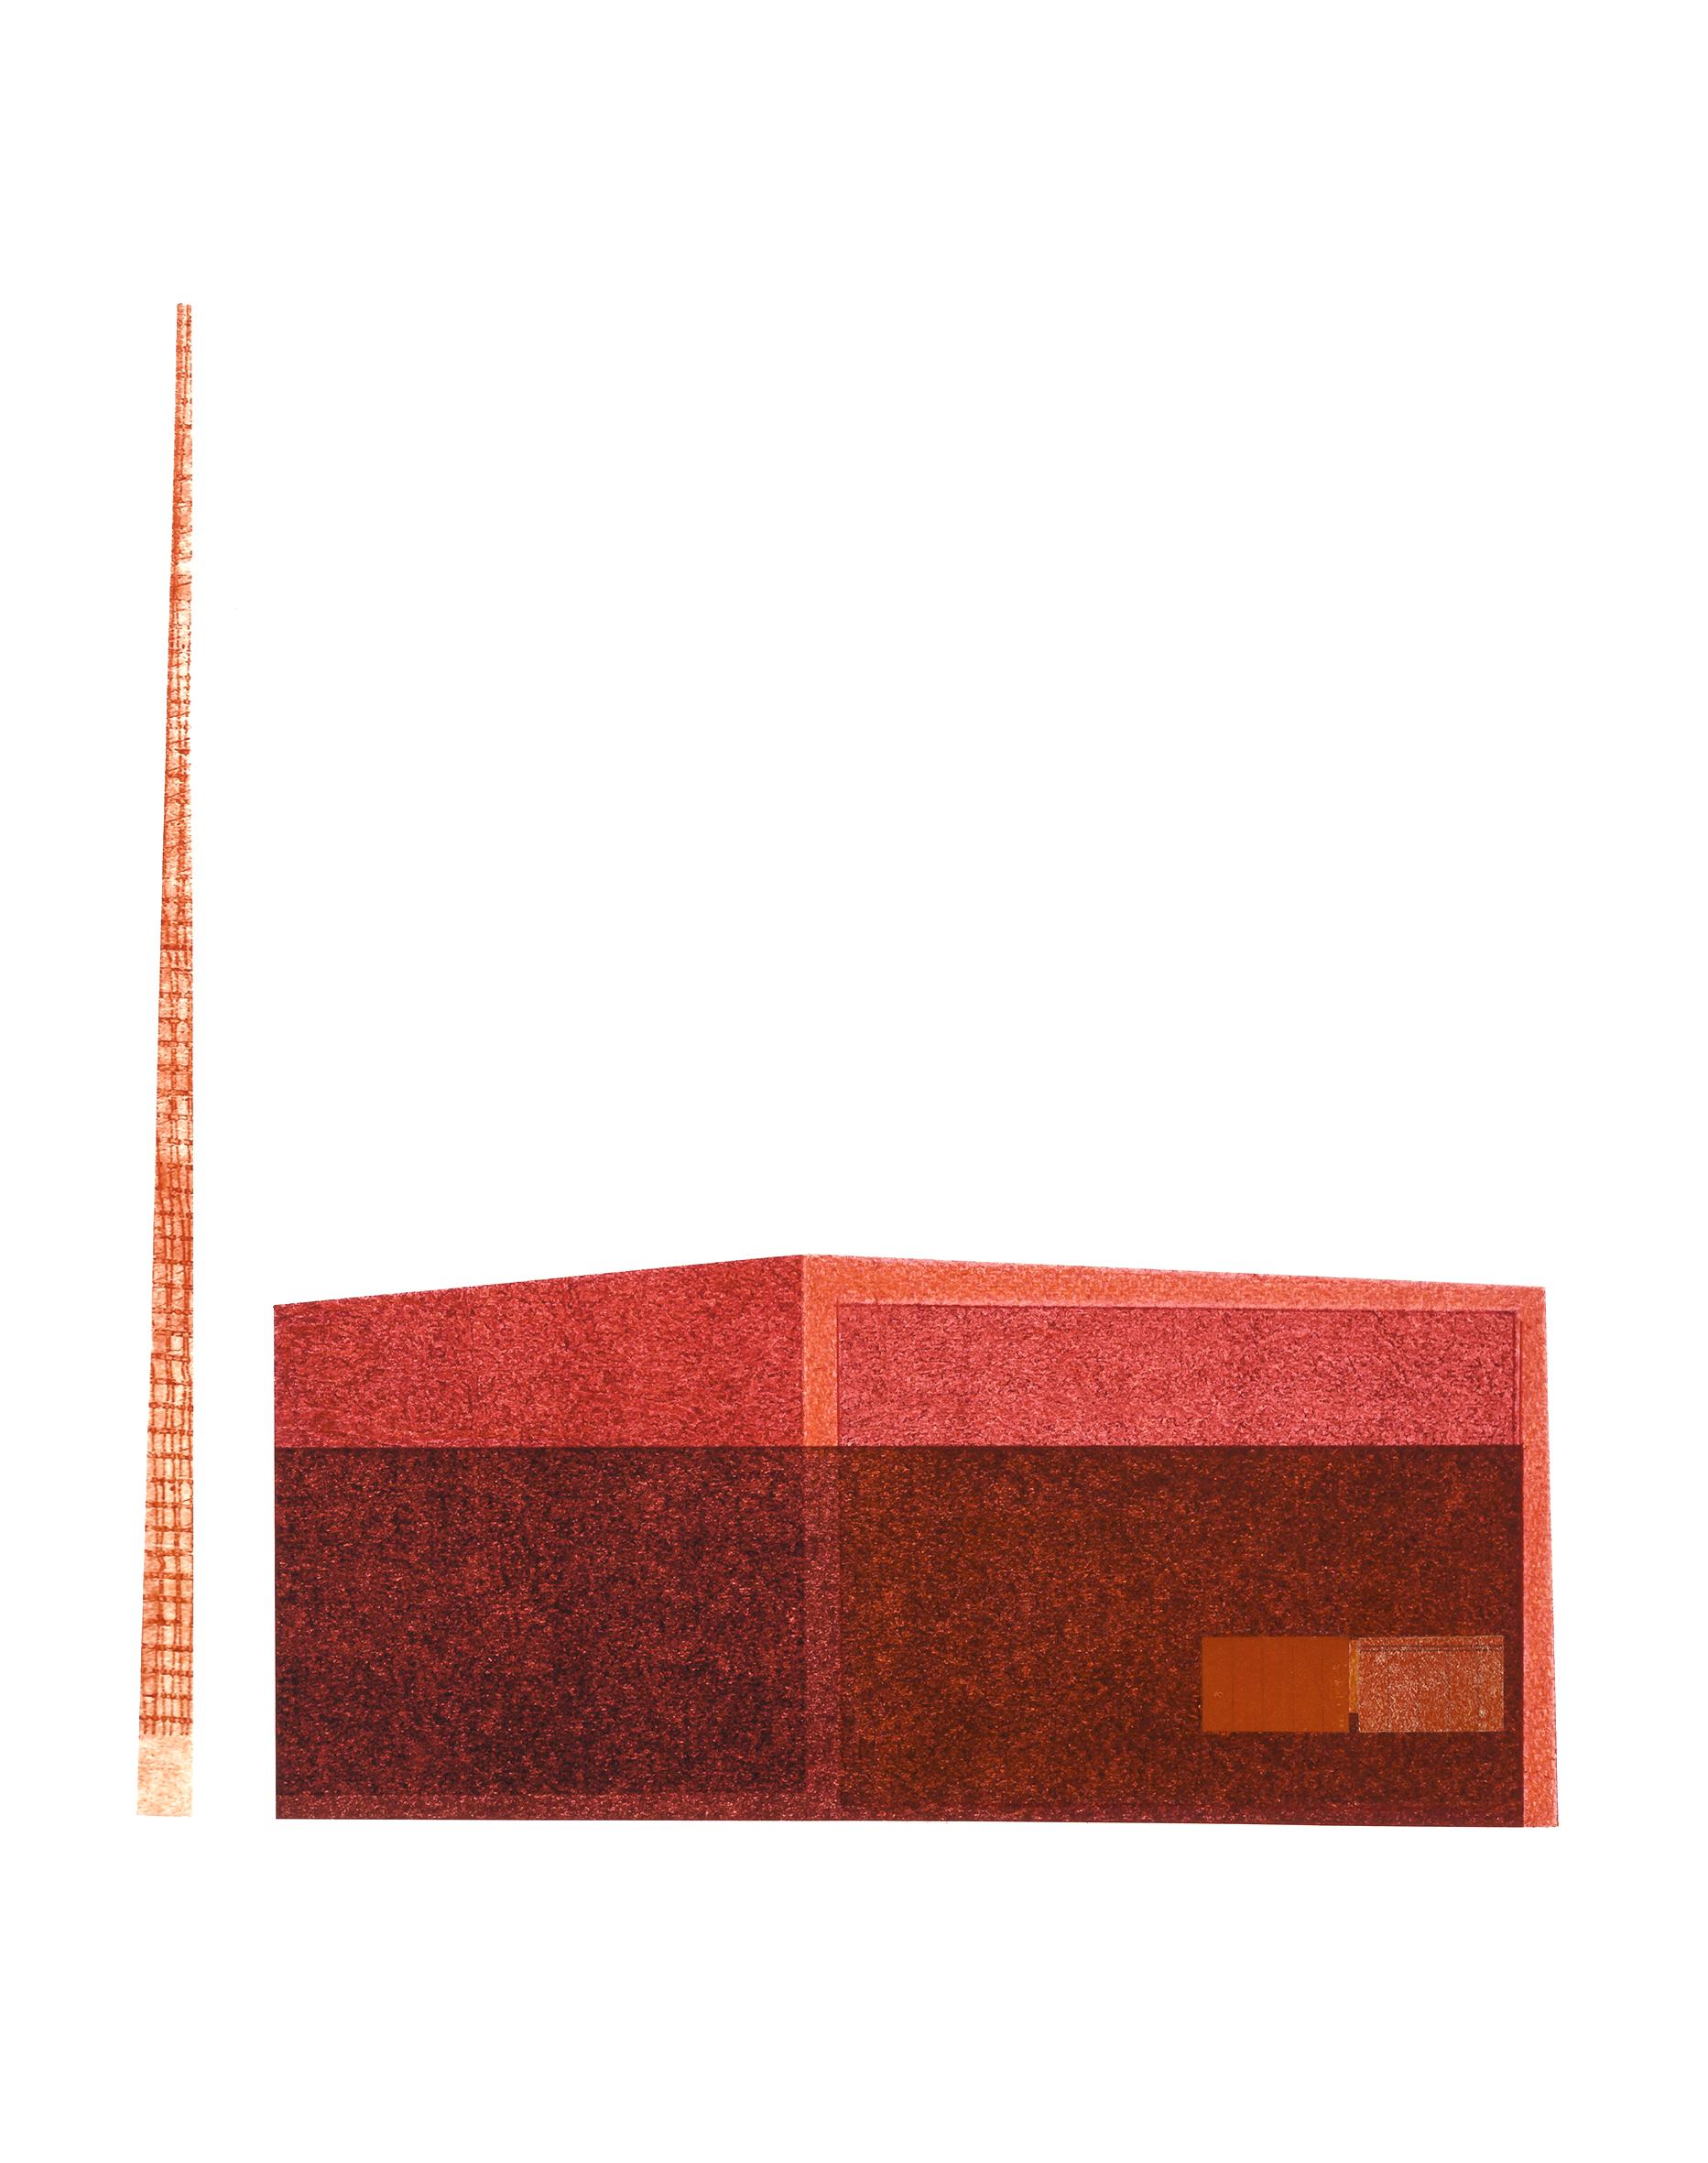 Agathe Bouton Abstract Print - Power Station: modernist urban architectural collage on monoprint in red, framed